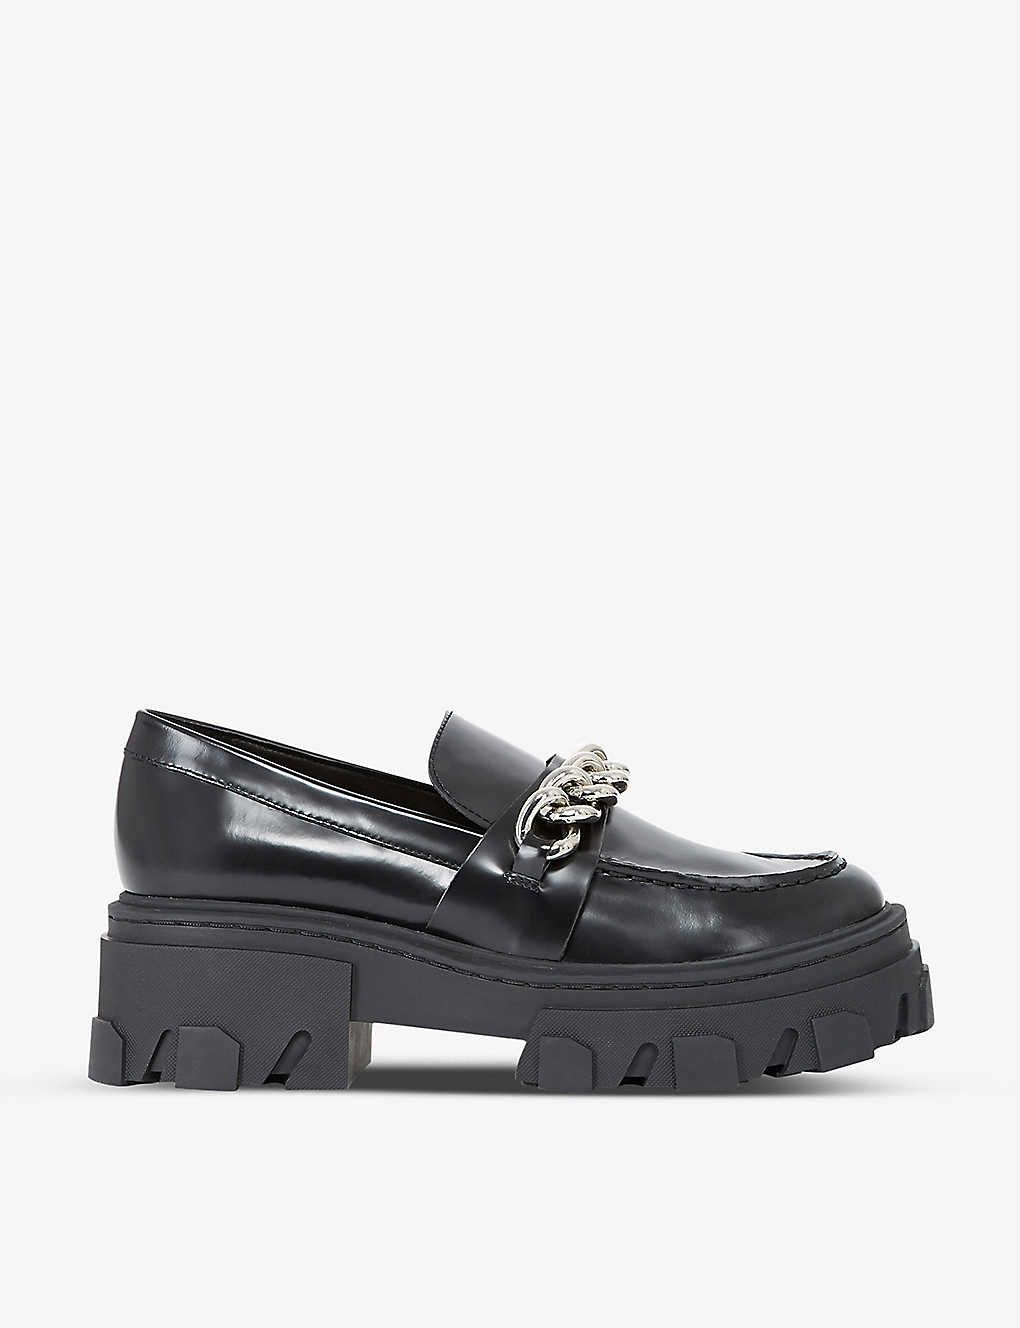 Chain-embellished patent leather moccasins | Selfridges